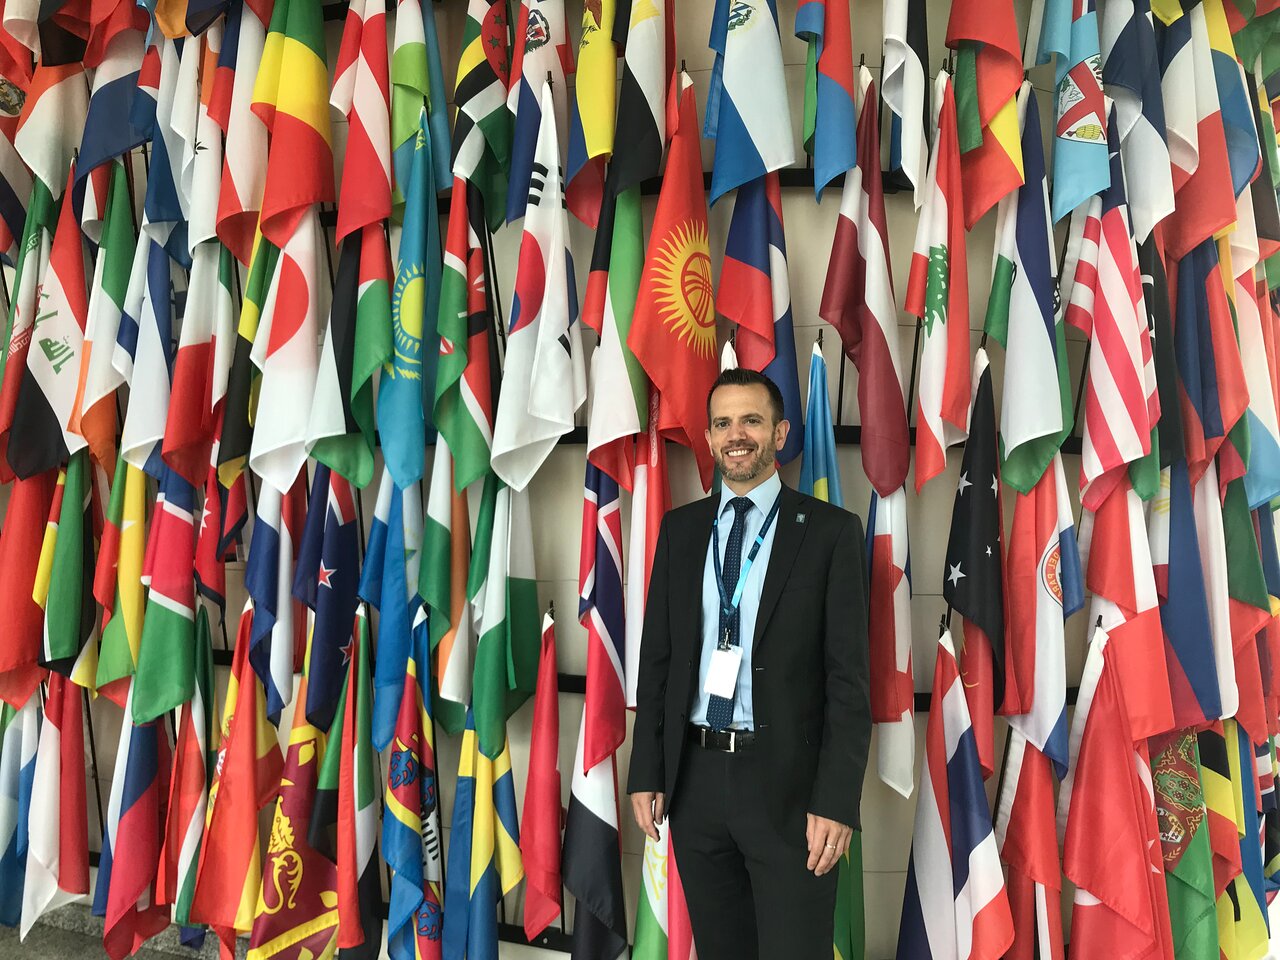 Andrew Williams at the June 2019 session of COPUOS